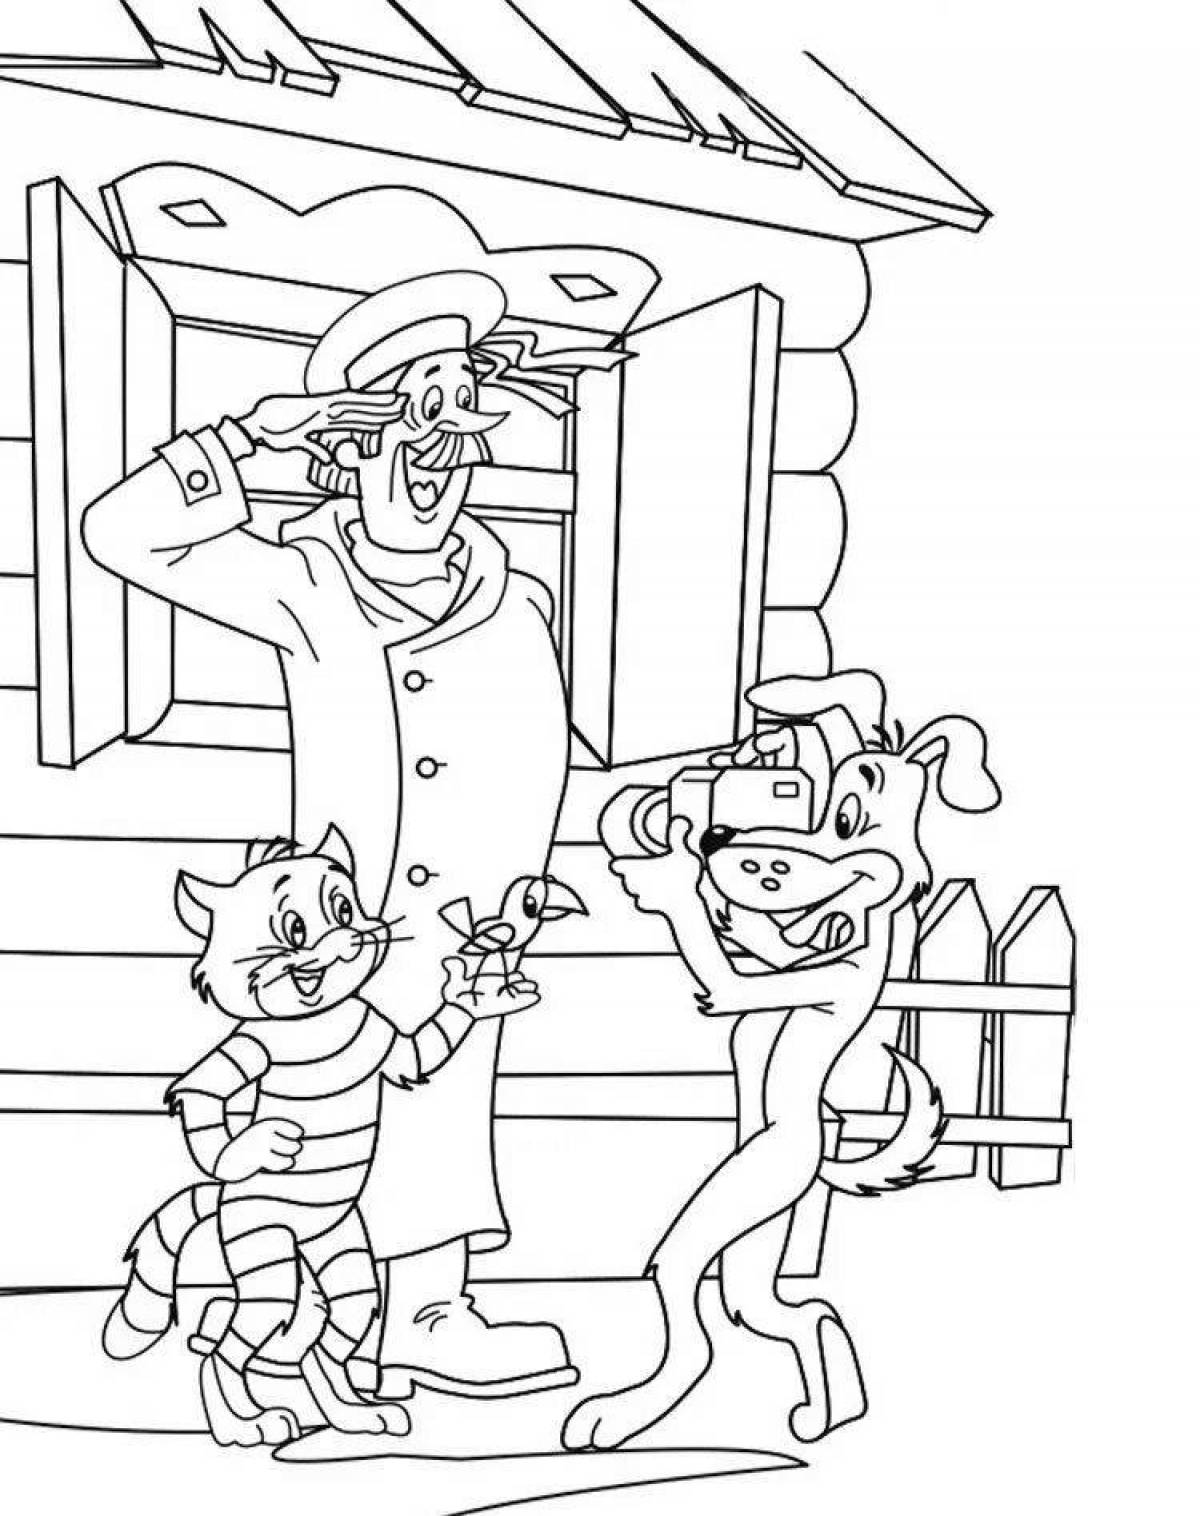 Bright coloring pages of buttermilk for girls